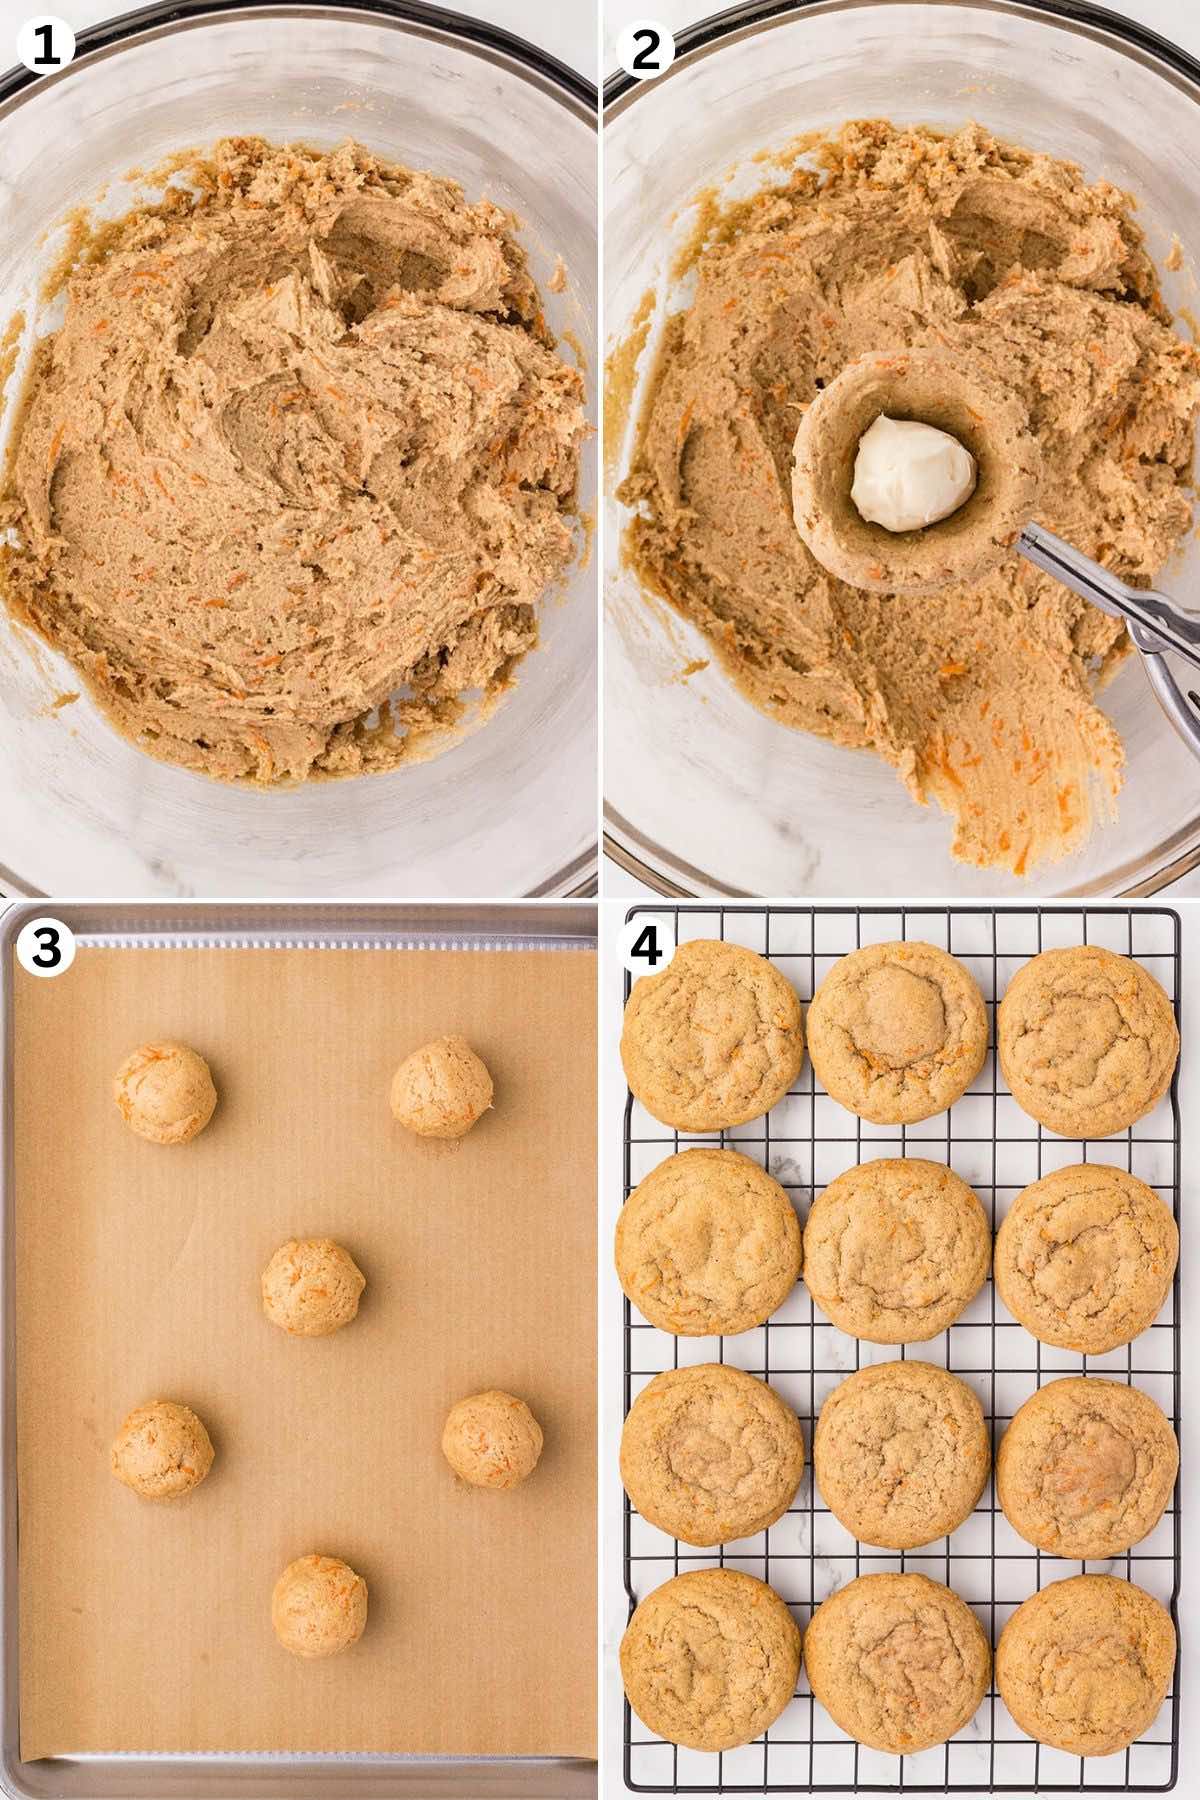 make the carrot cake cookie dough. scoop and create a well in the middle of the dough. place the cream cheese mixture and roll. place in baking sheet and bake.